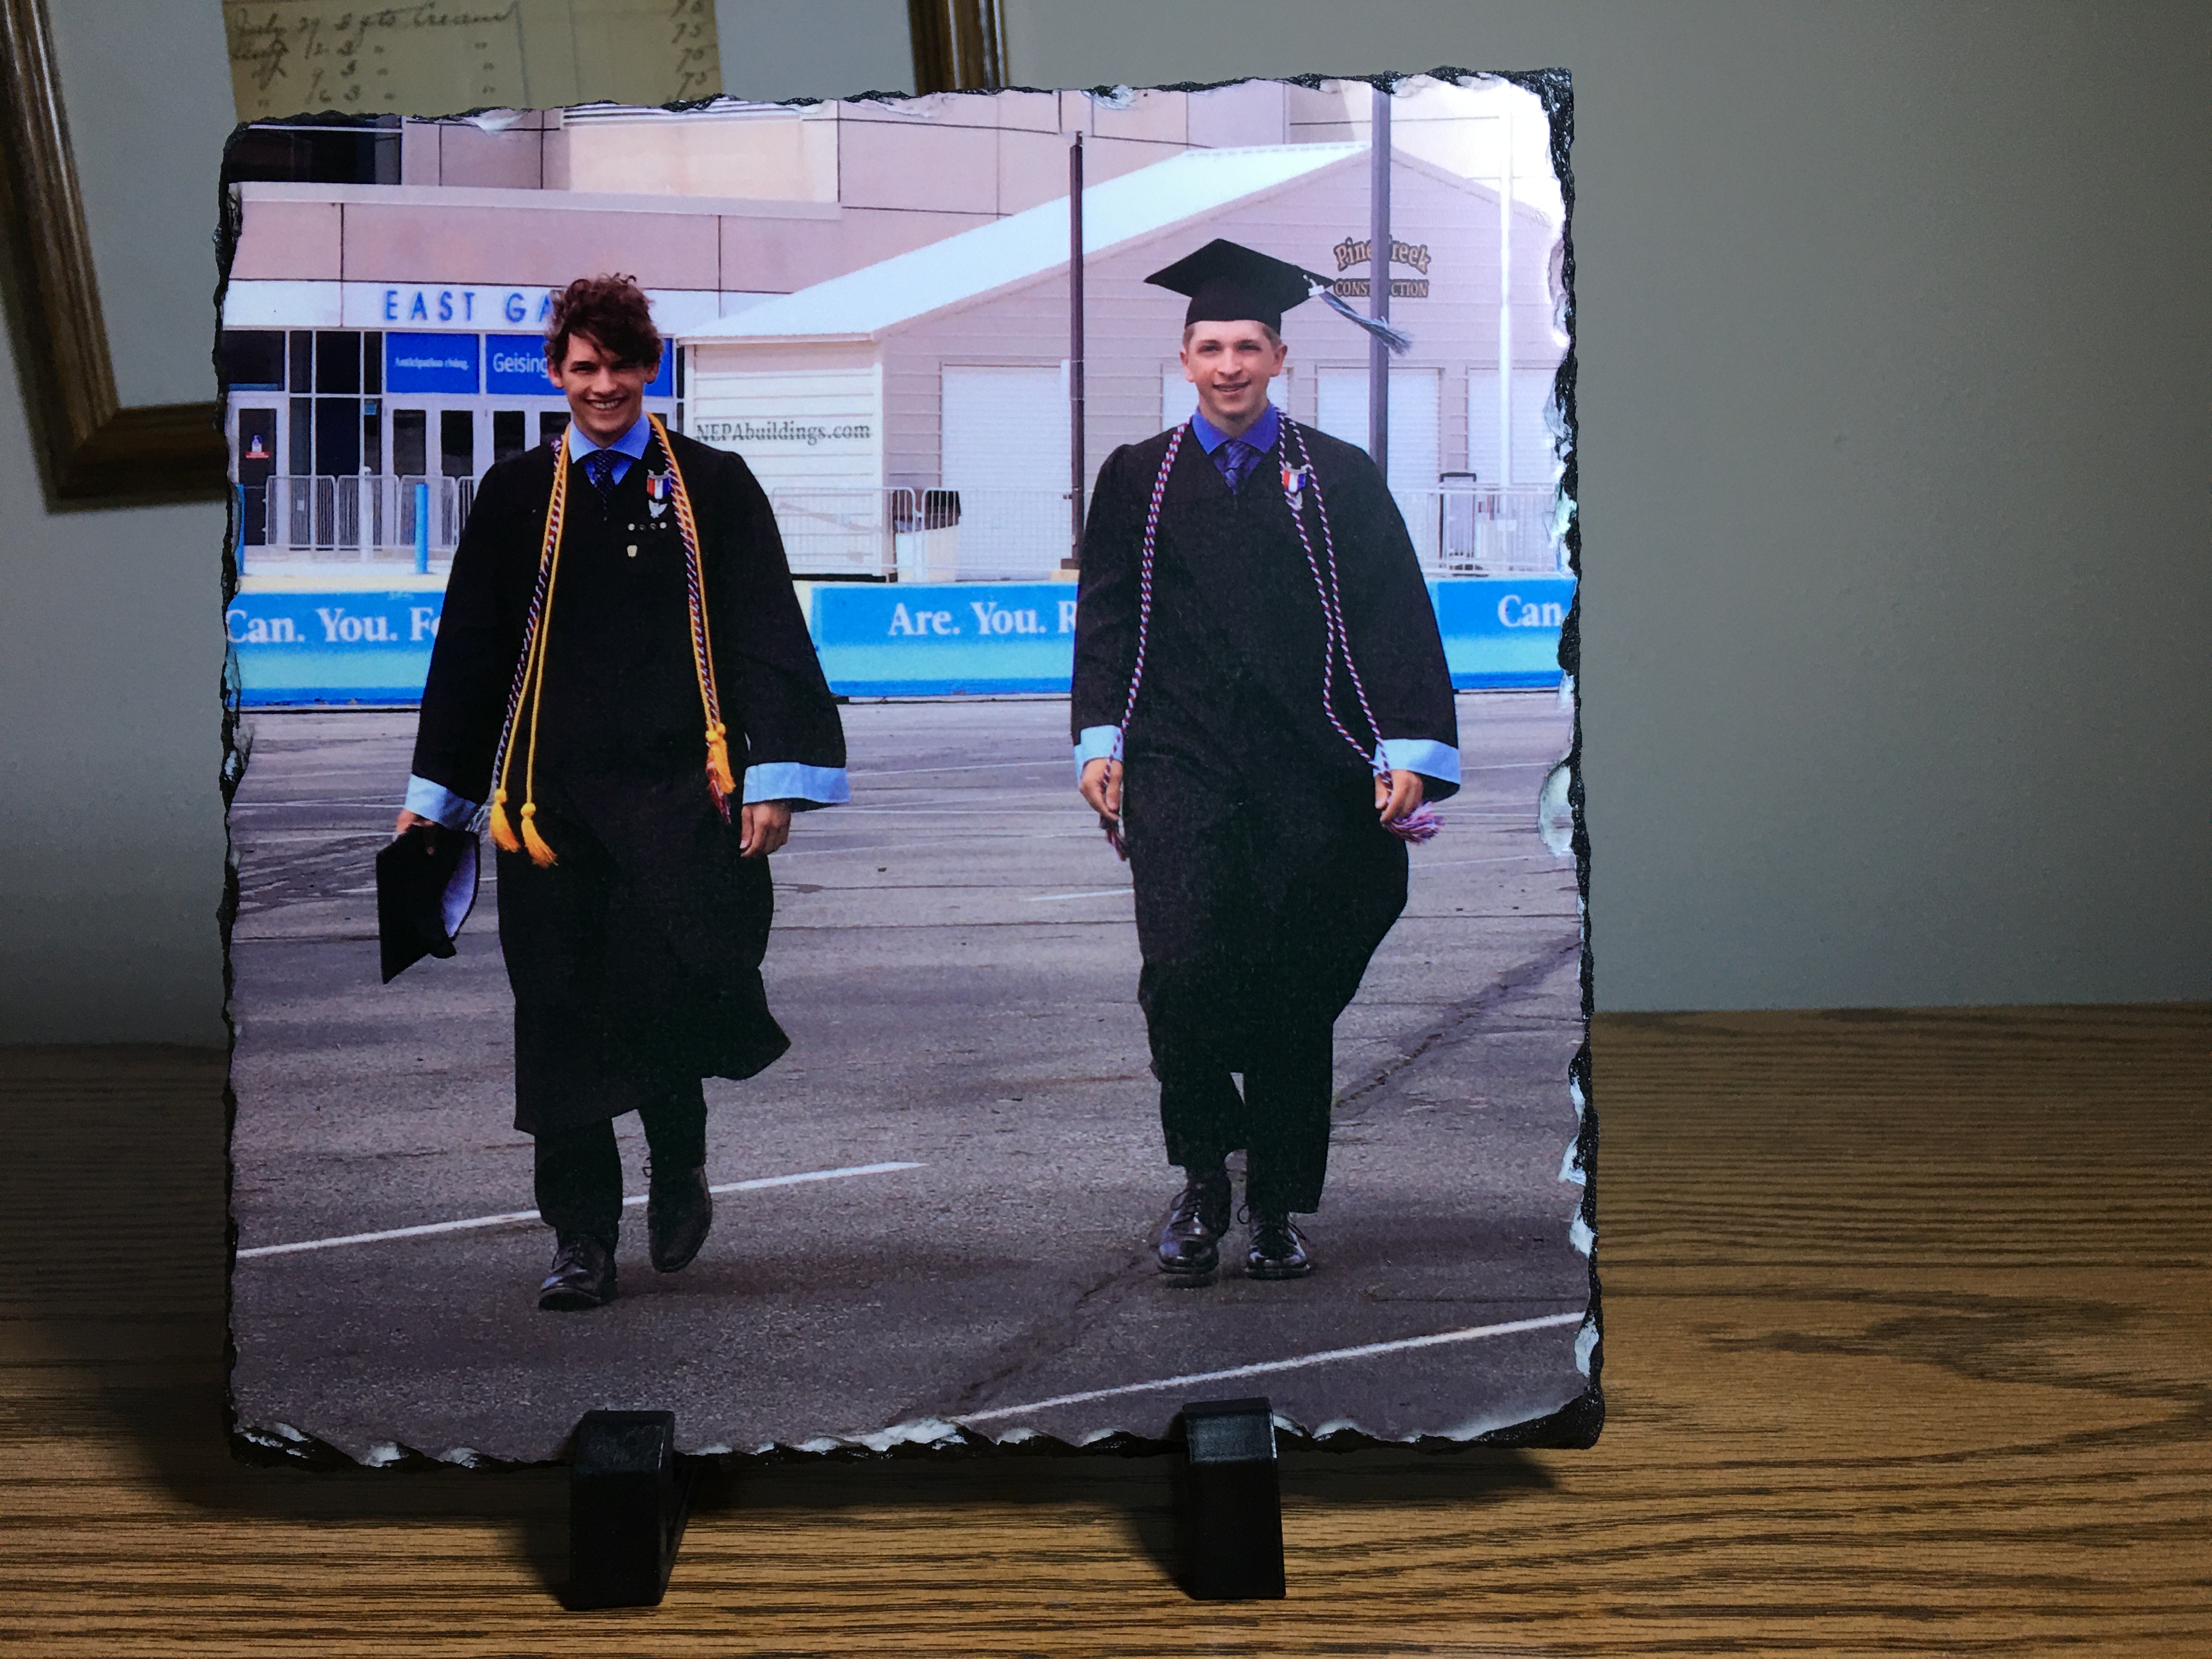 Graduation Day made with sublimation printing